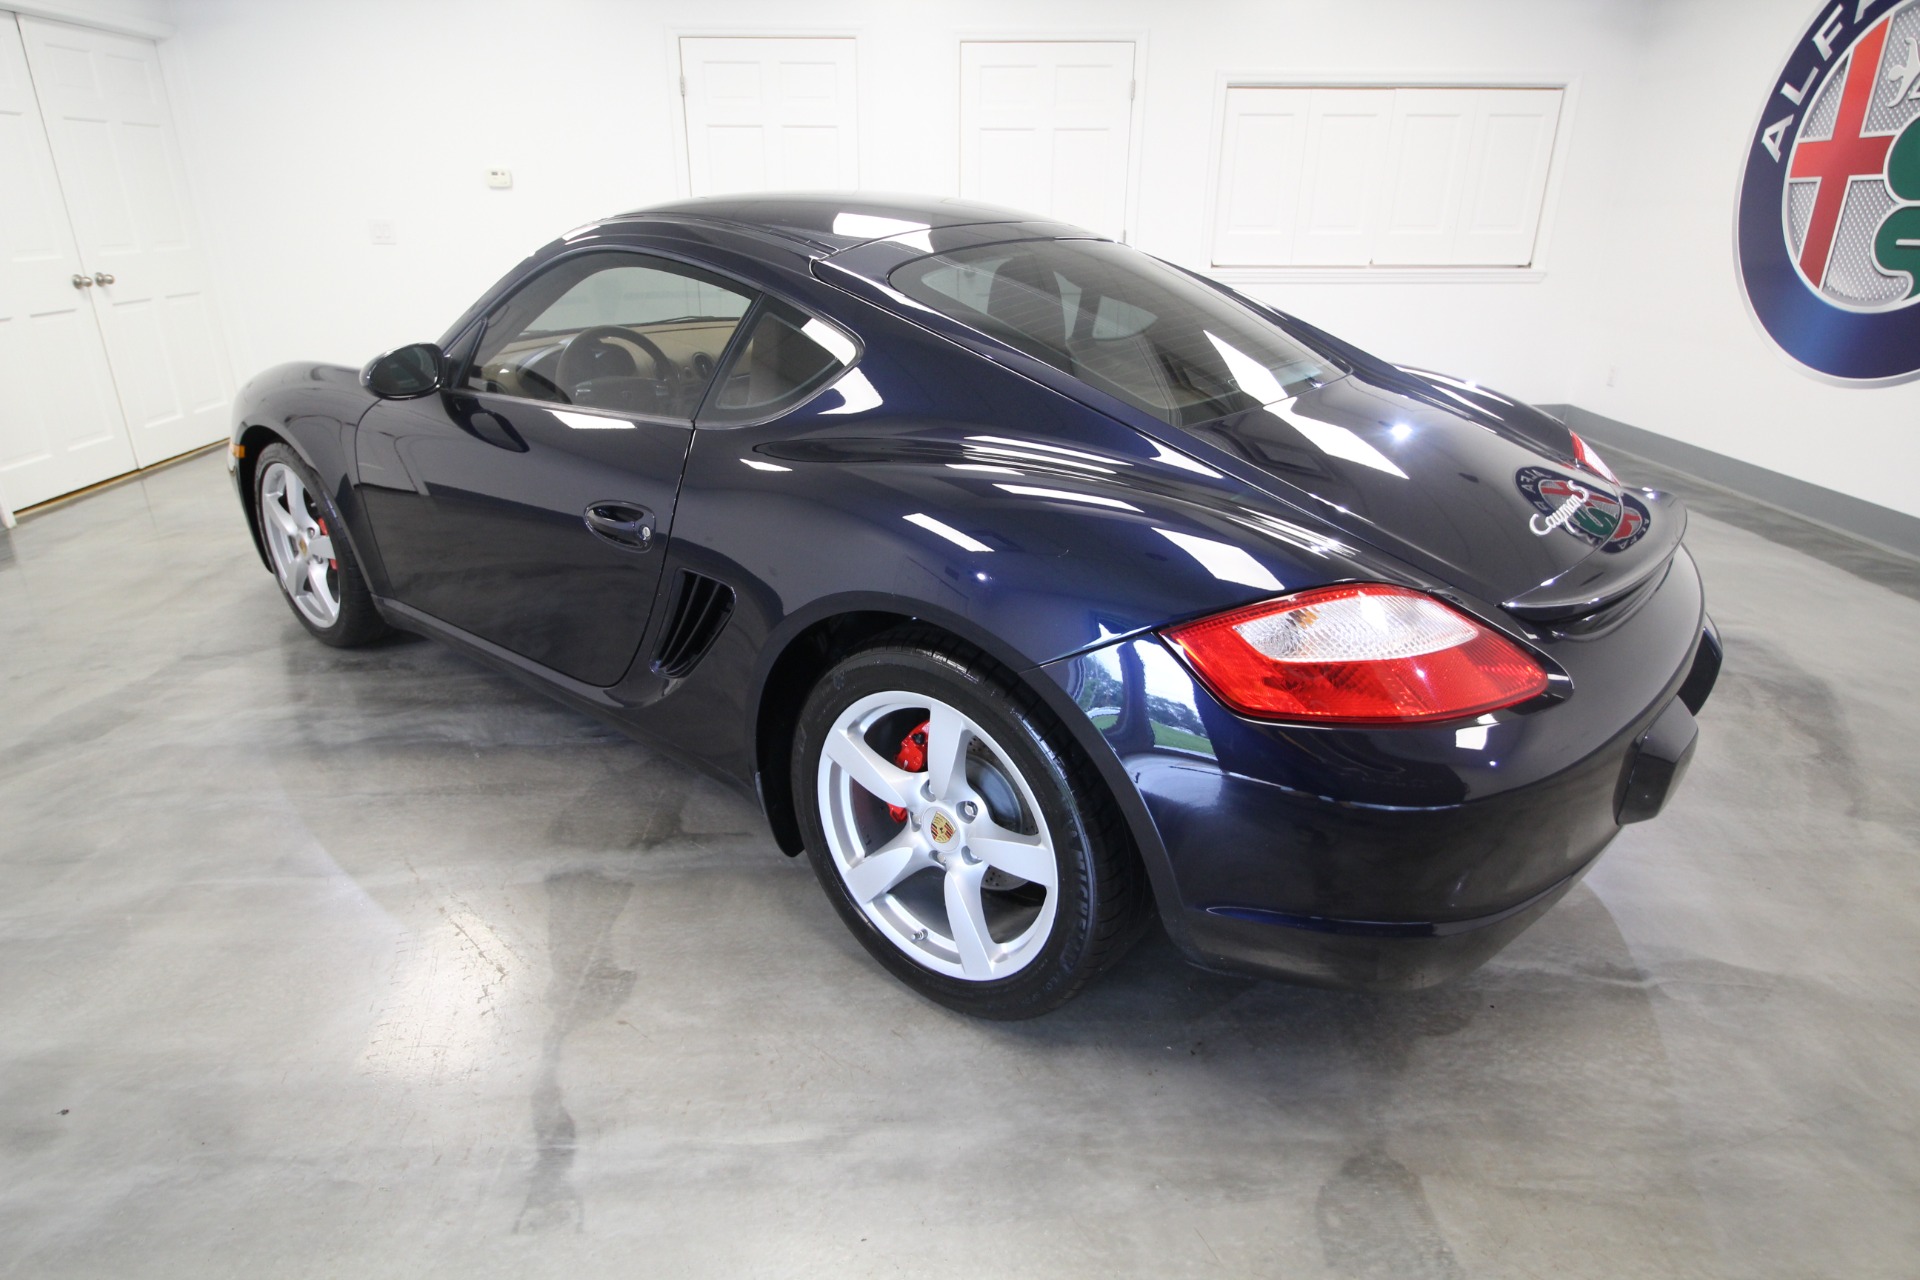 Used 2007 Midnight Blue Metallic Porsche Cayman S Fully Serviced Clean Cayman | Albany, NY